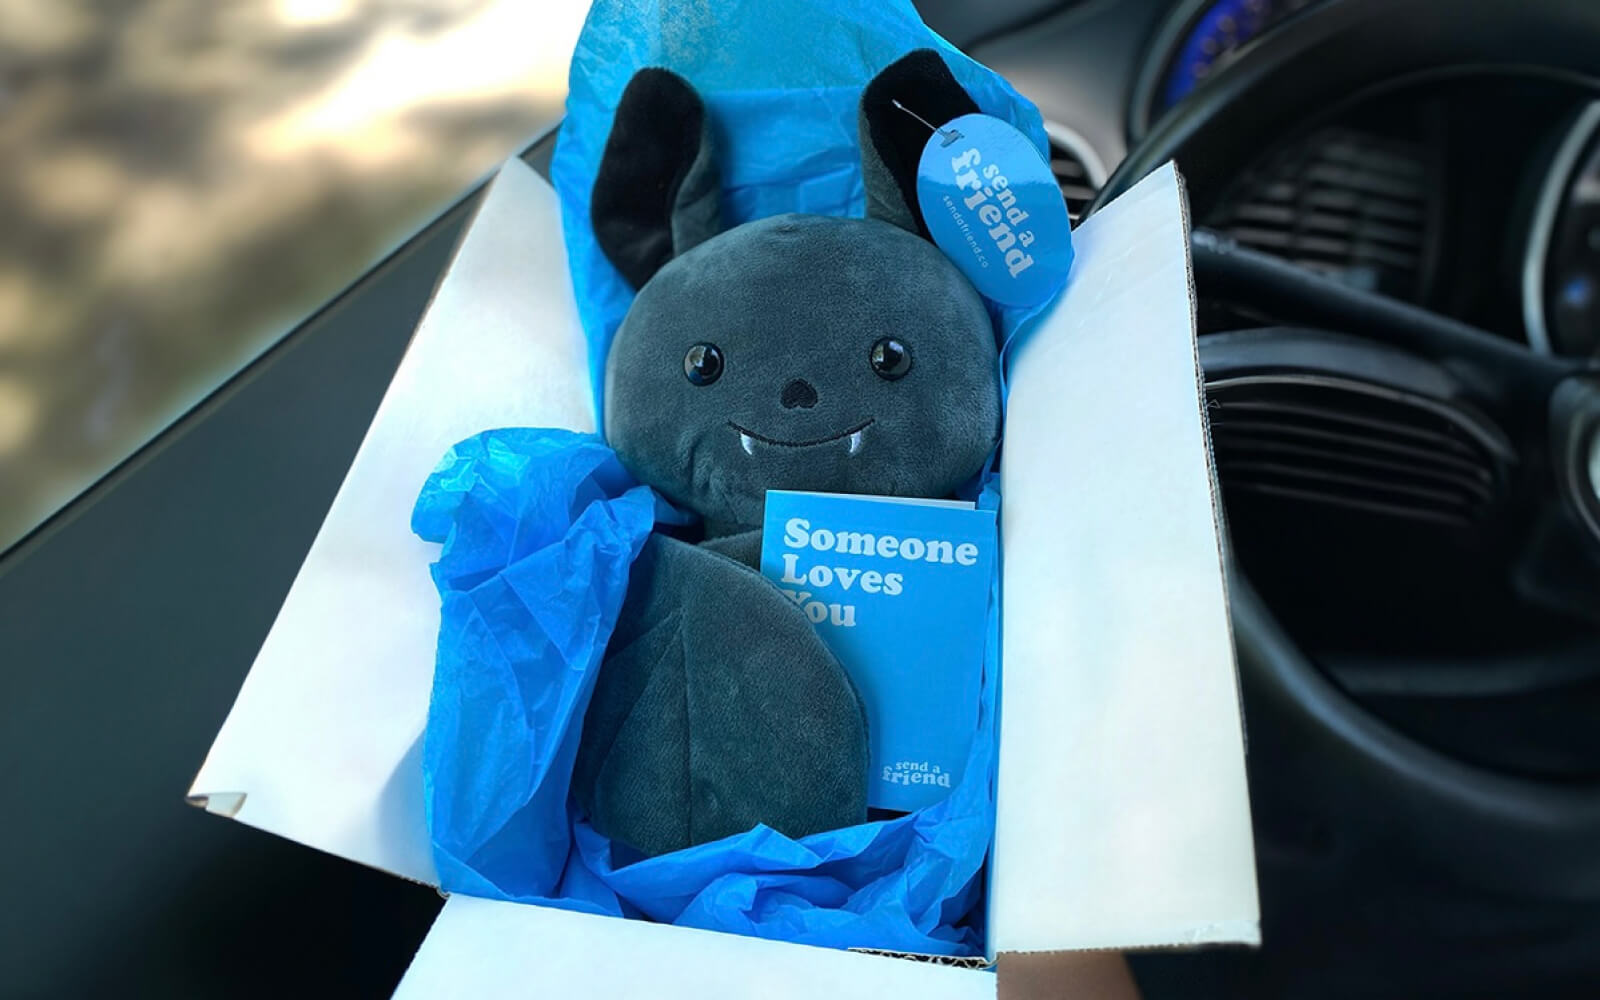 bat stuffed animal in box with "someone loves you" notecard